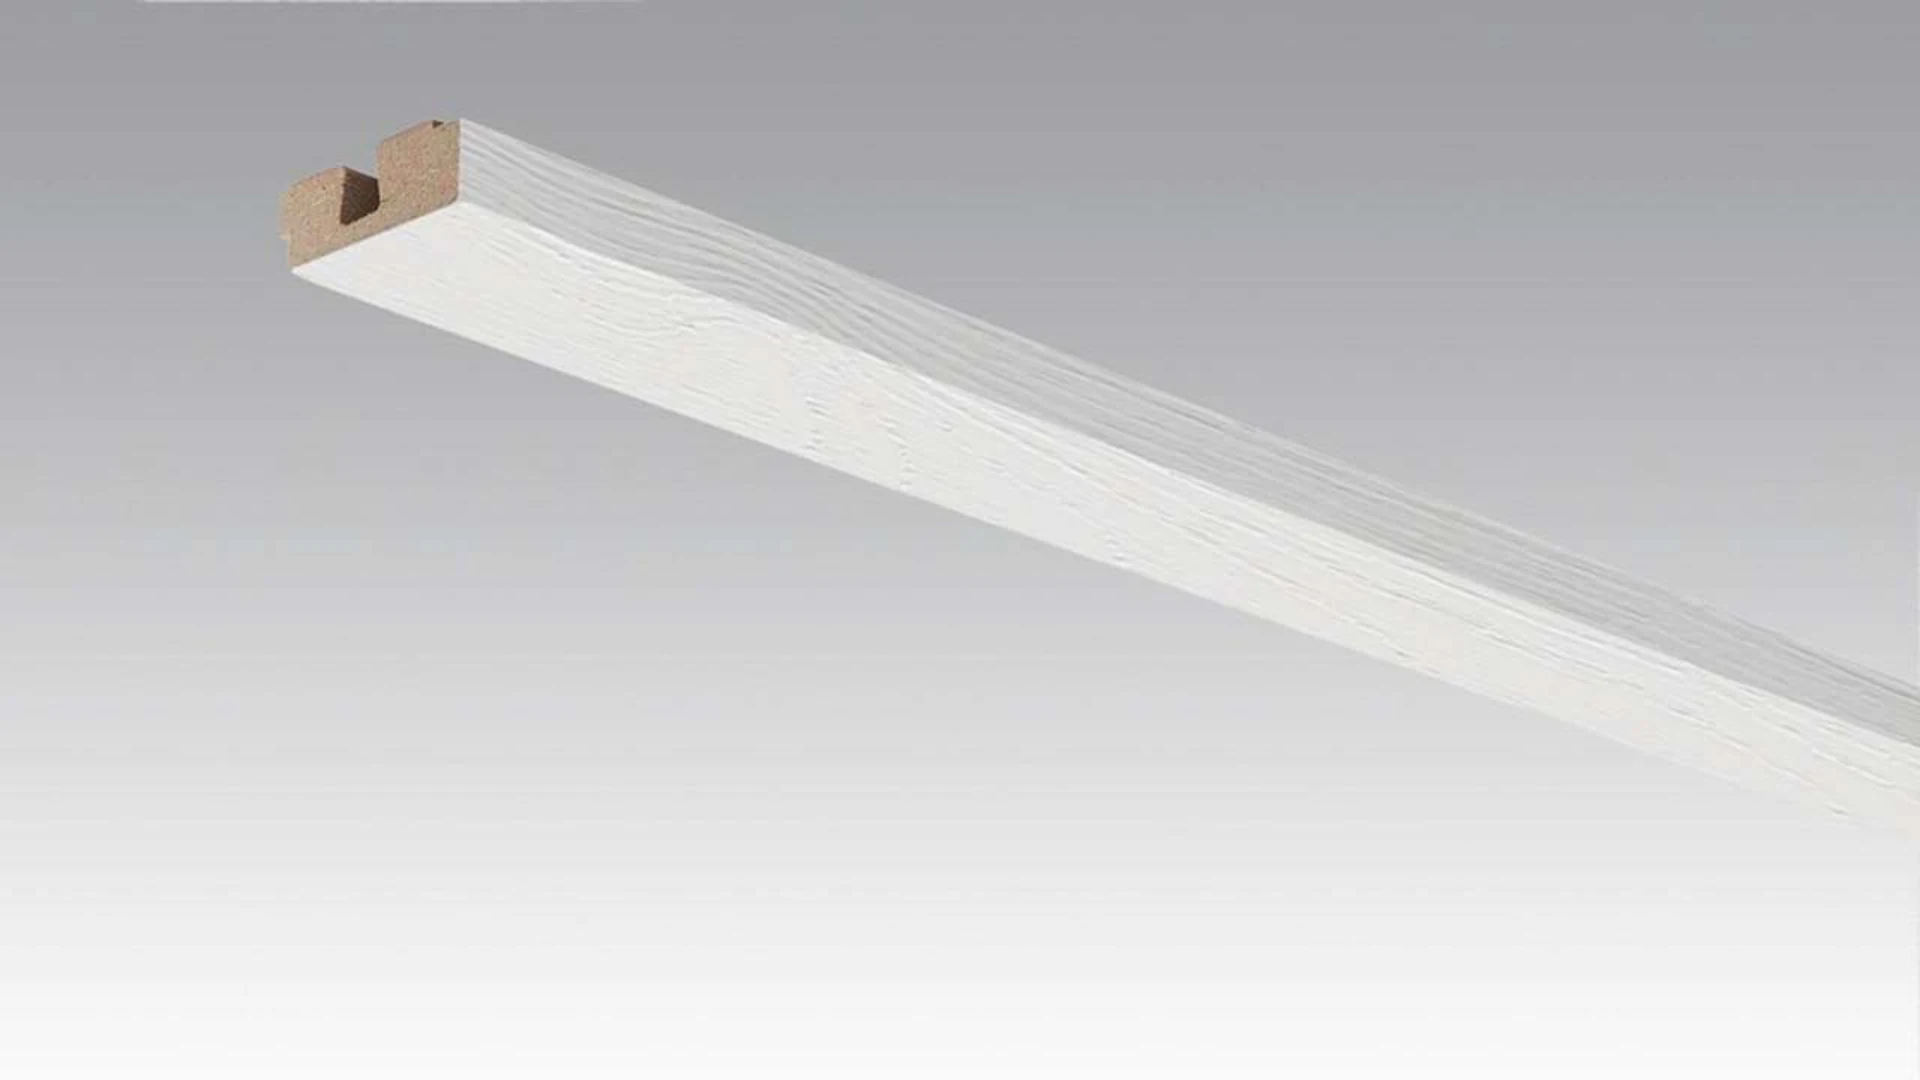 MEISTER square-edged ceiling trim Mountain Wood white 4205 - 2380 x 40 x 15 mm (200032-2380-04205)